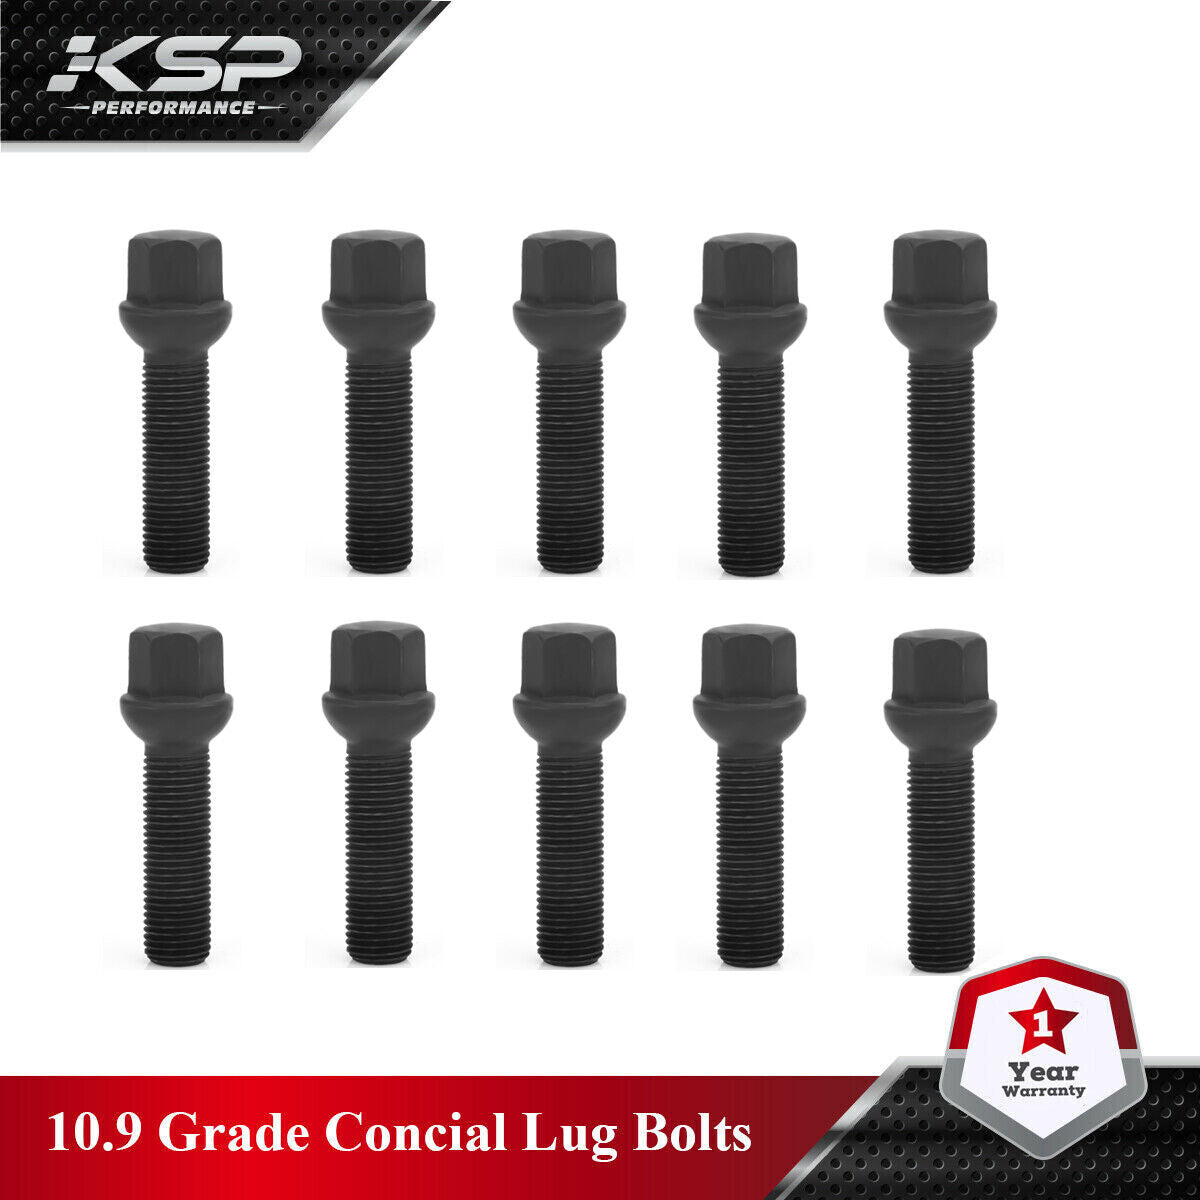 20pcs Ball Seat 14x1.5 Aftermarket Lug Bolts For Audi VolksWagen Mercedes Benz Wheel Spacers-7